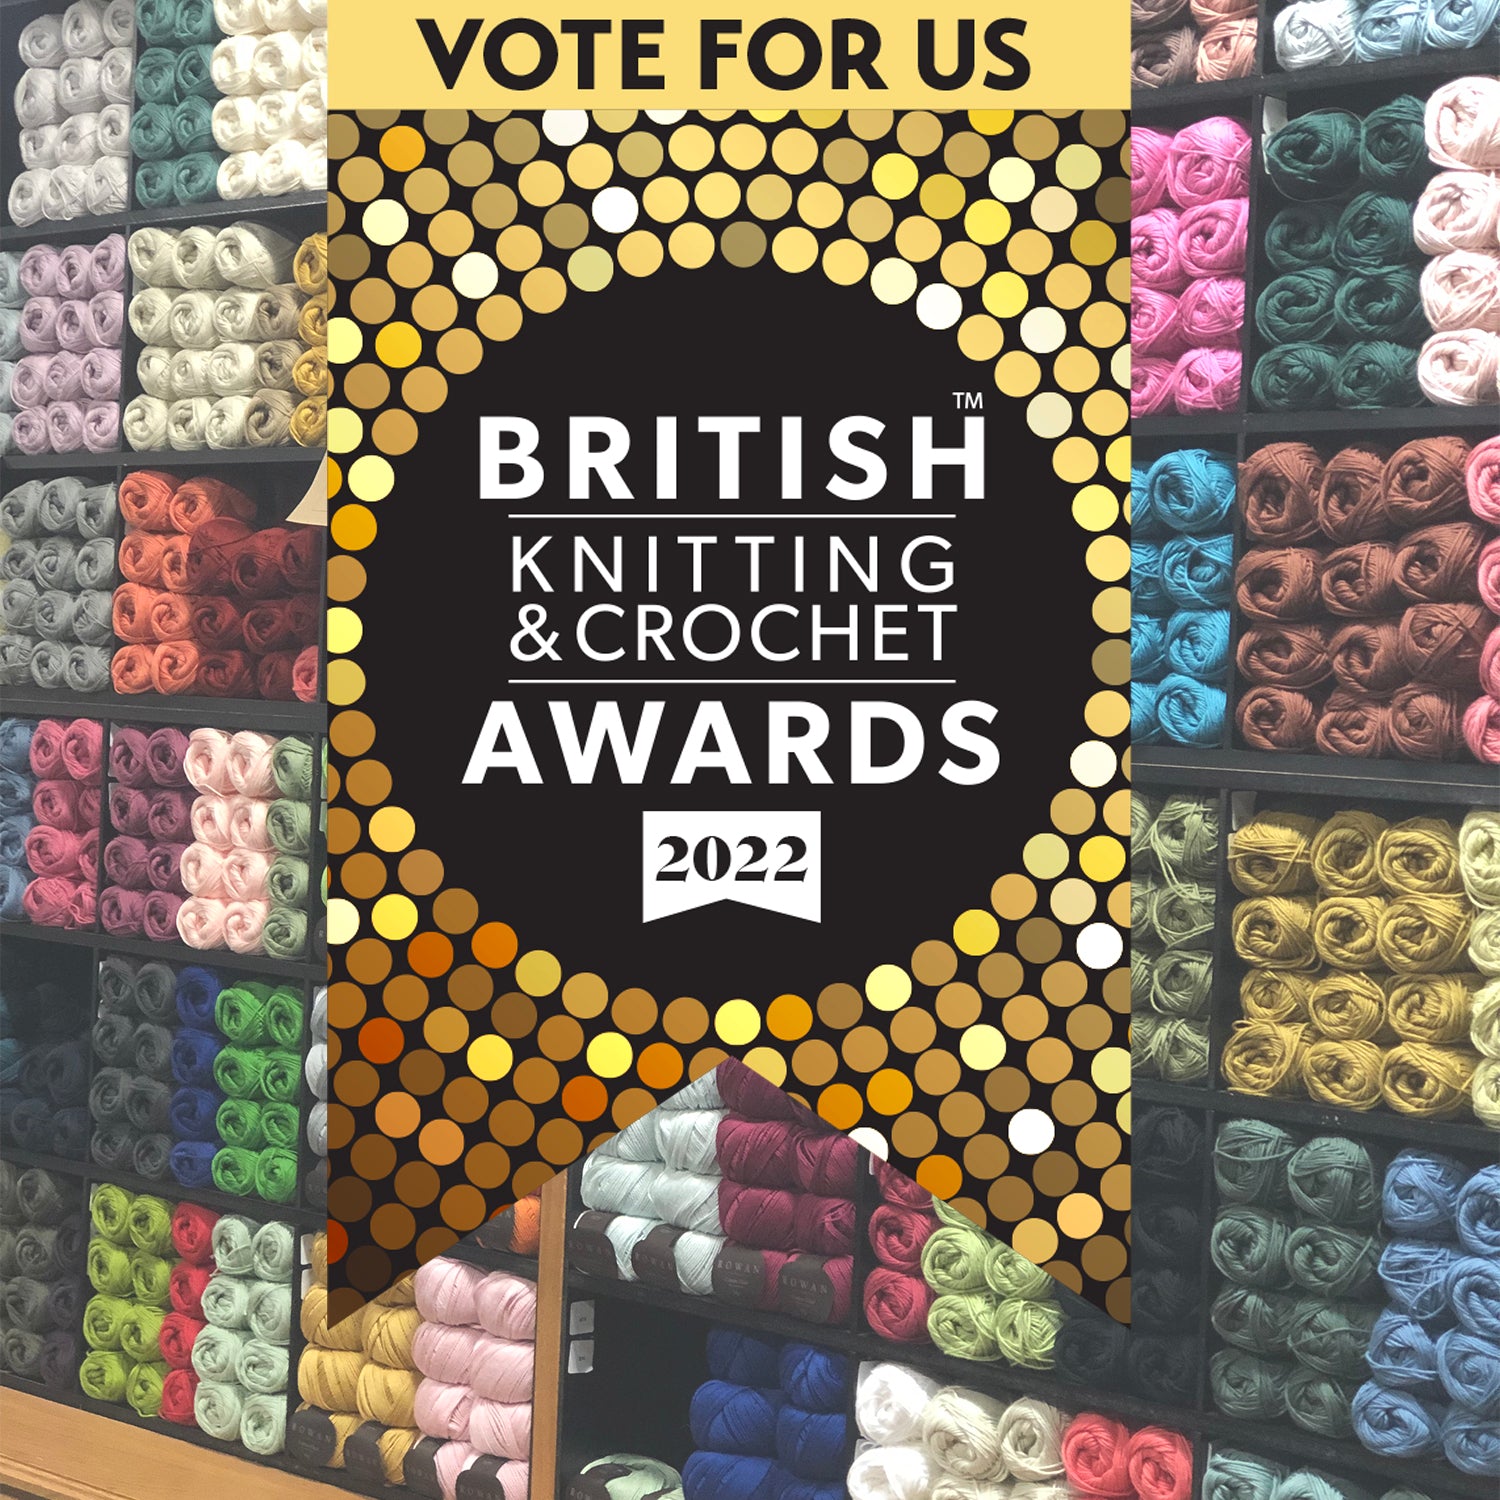 It's time to vote in the British Knitting & Crochet Awards 2022